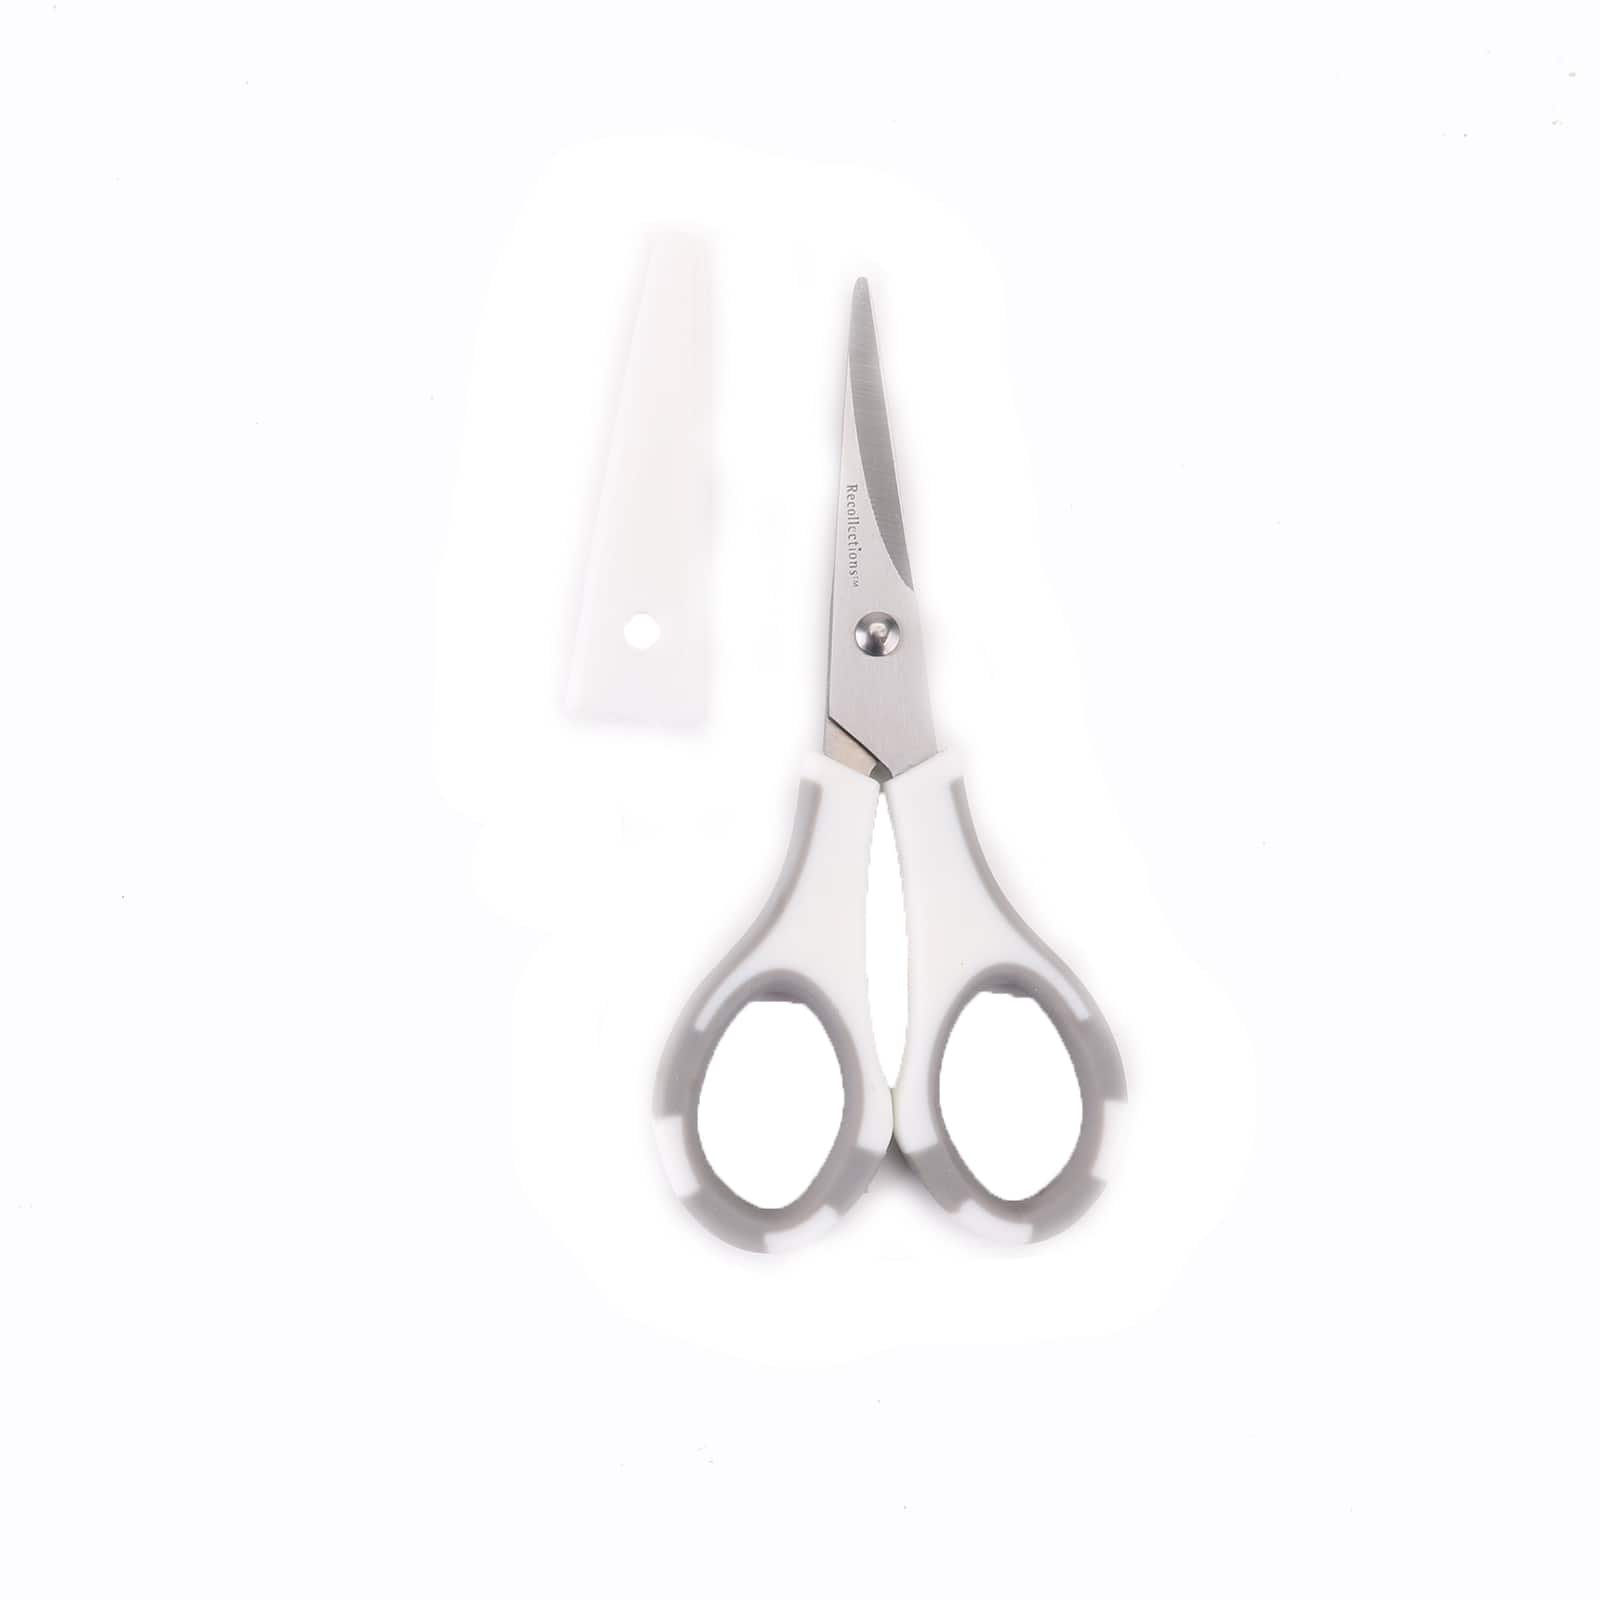 Recollections Precision Scissors - Each